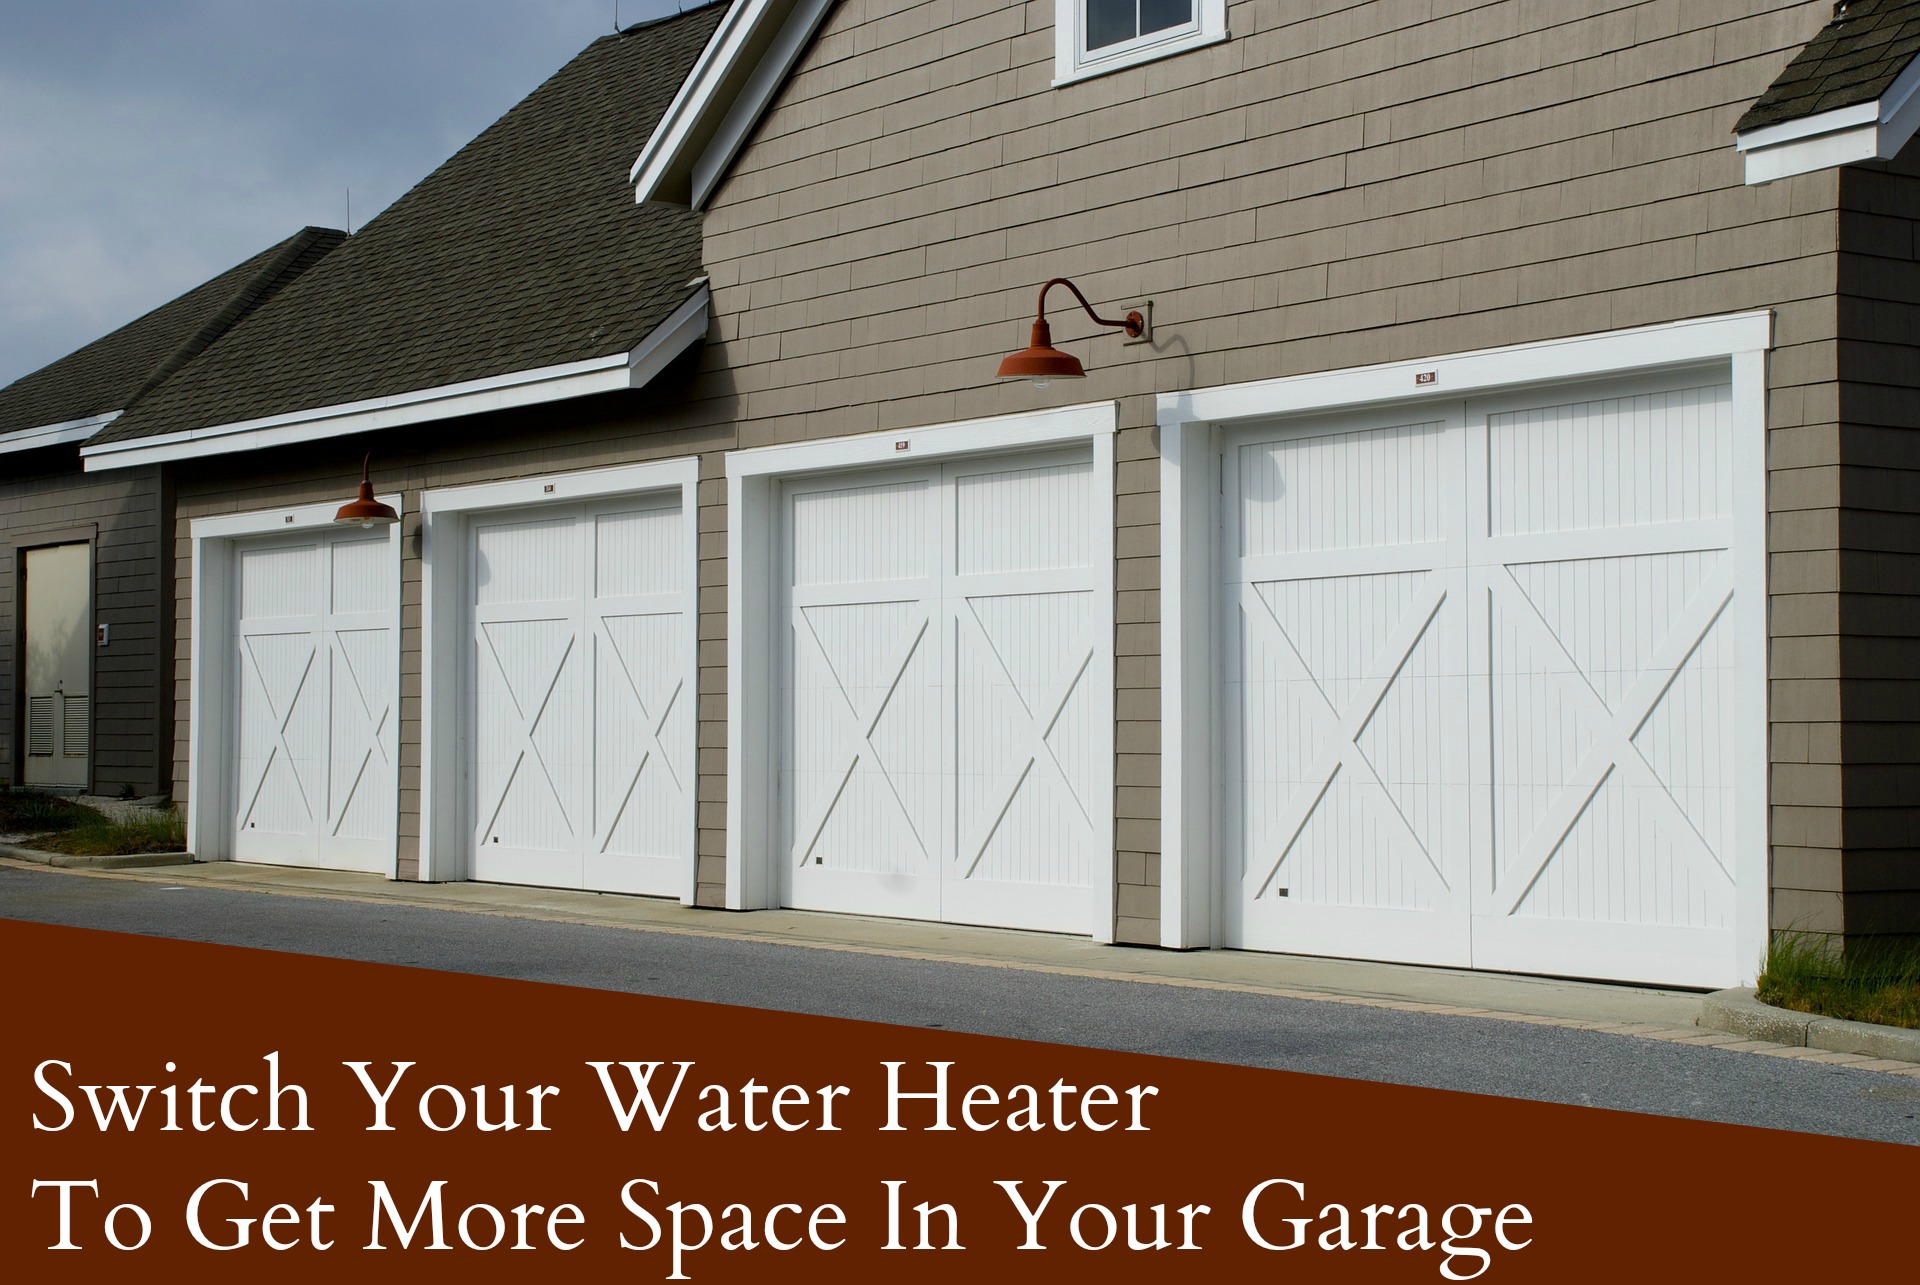 Reclaim Garage Space with a Tank-less Water Heater